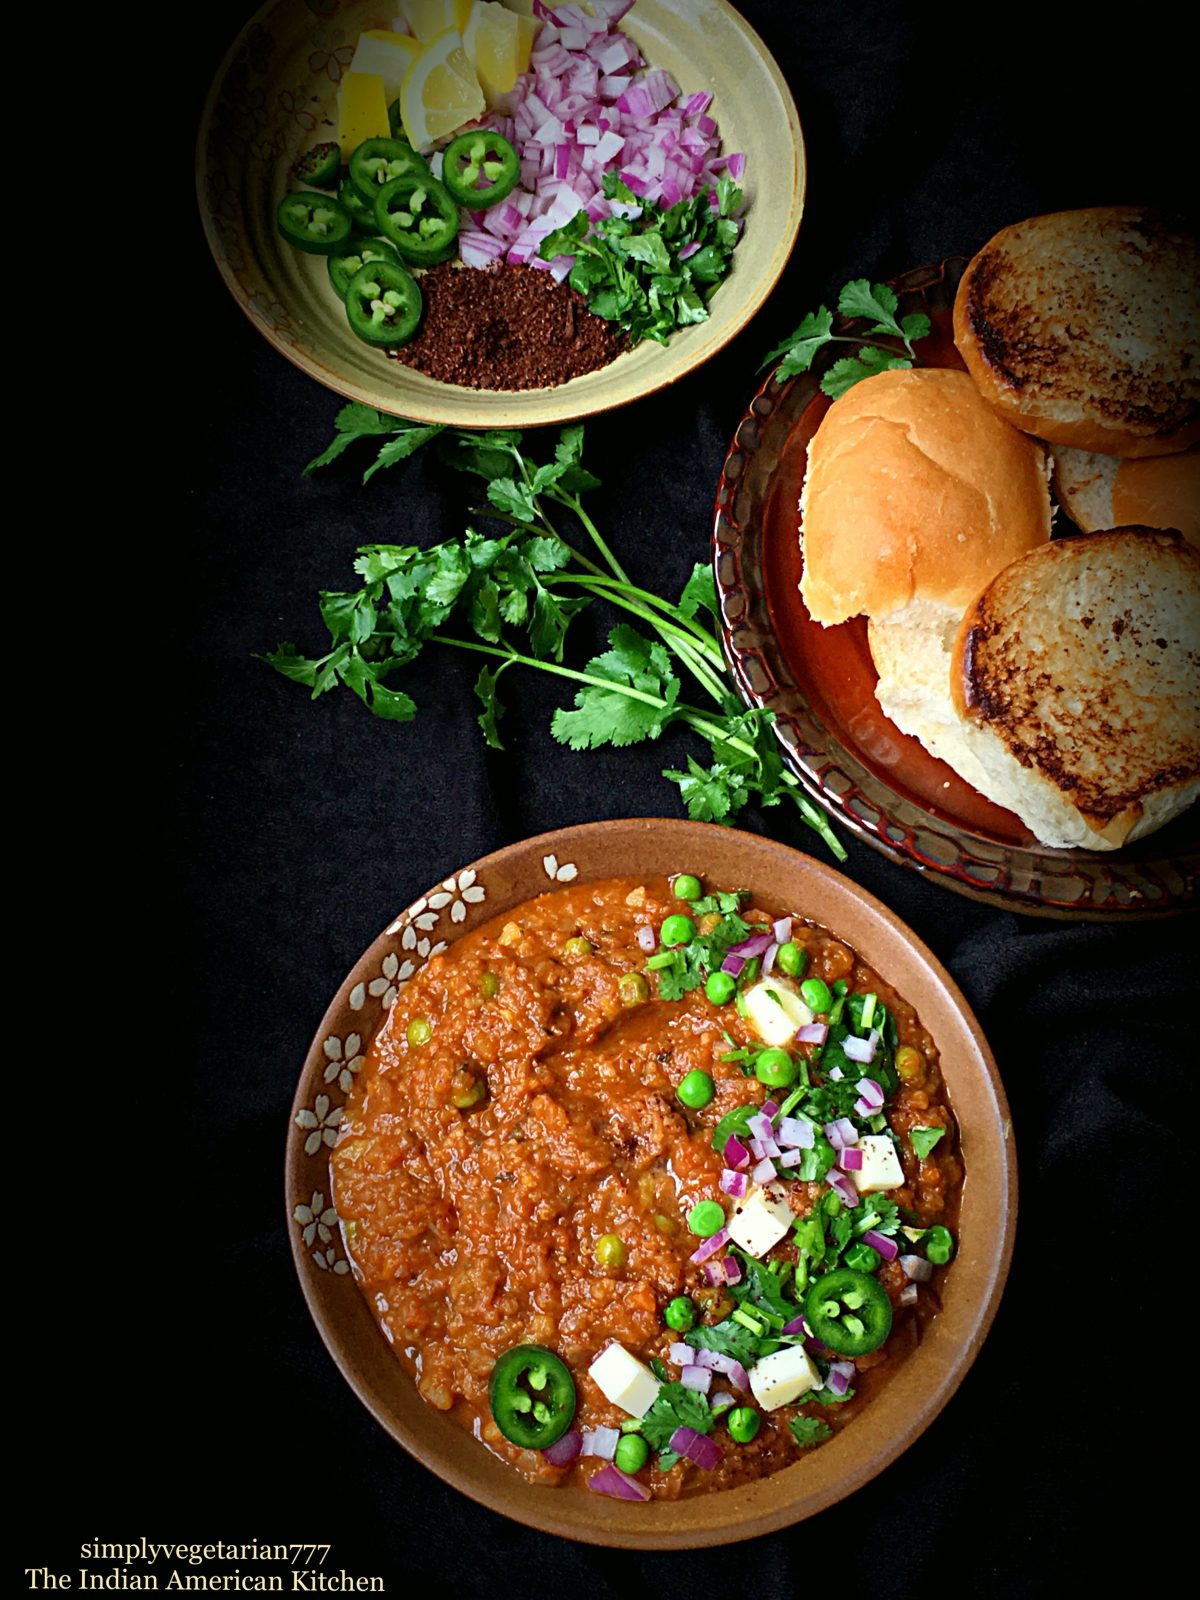 Instant Pot Pav Bhaji Recipe is the lip-smacking delicious street food from Mumbai, India. Potatoes cooked in spicy tomato Curry makes the BHAJI. To counter the heat, bhaji is served with butter grilled Pav or Dinner Rolls. The best part is that this recipe is made in INSTANT POT. The Stove Top instructions are also included. #pavbhaji #instantpotpavbhaji #instantpotvegetarianrecipes #instantpotindianrecipes #instantpotcurry